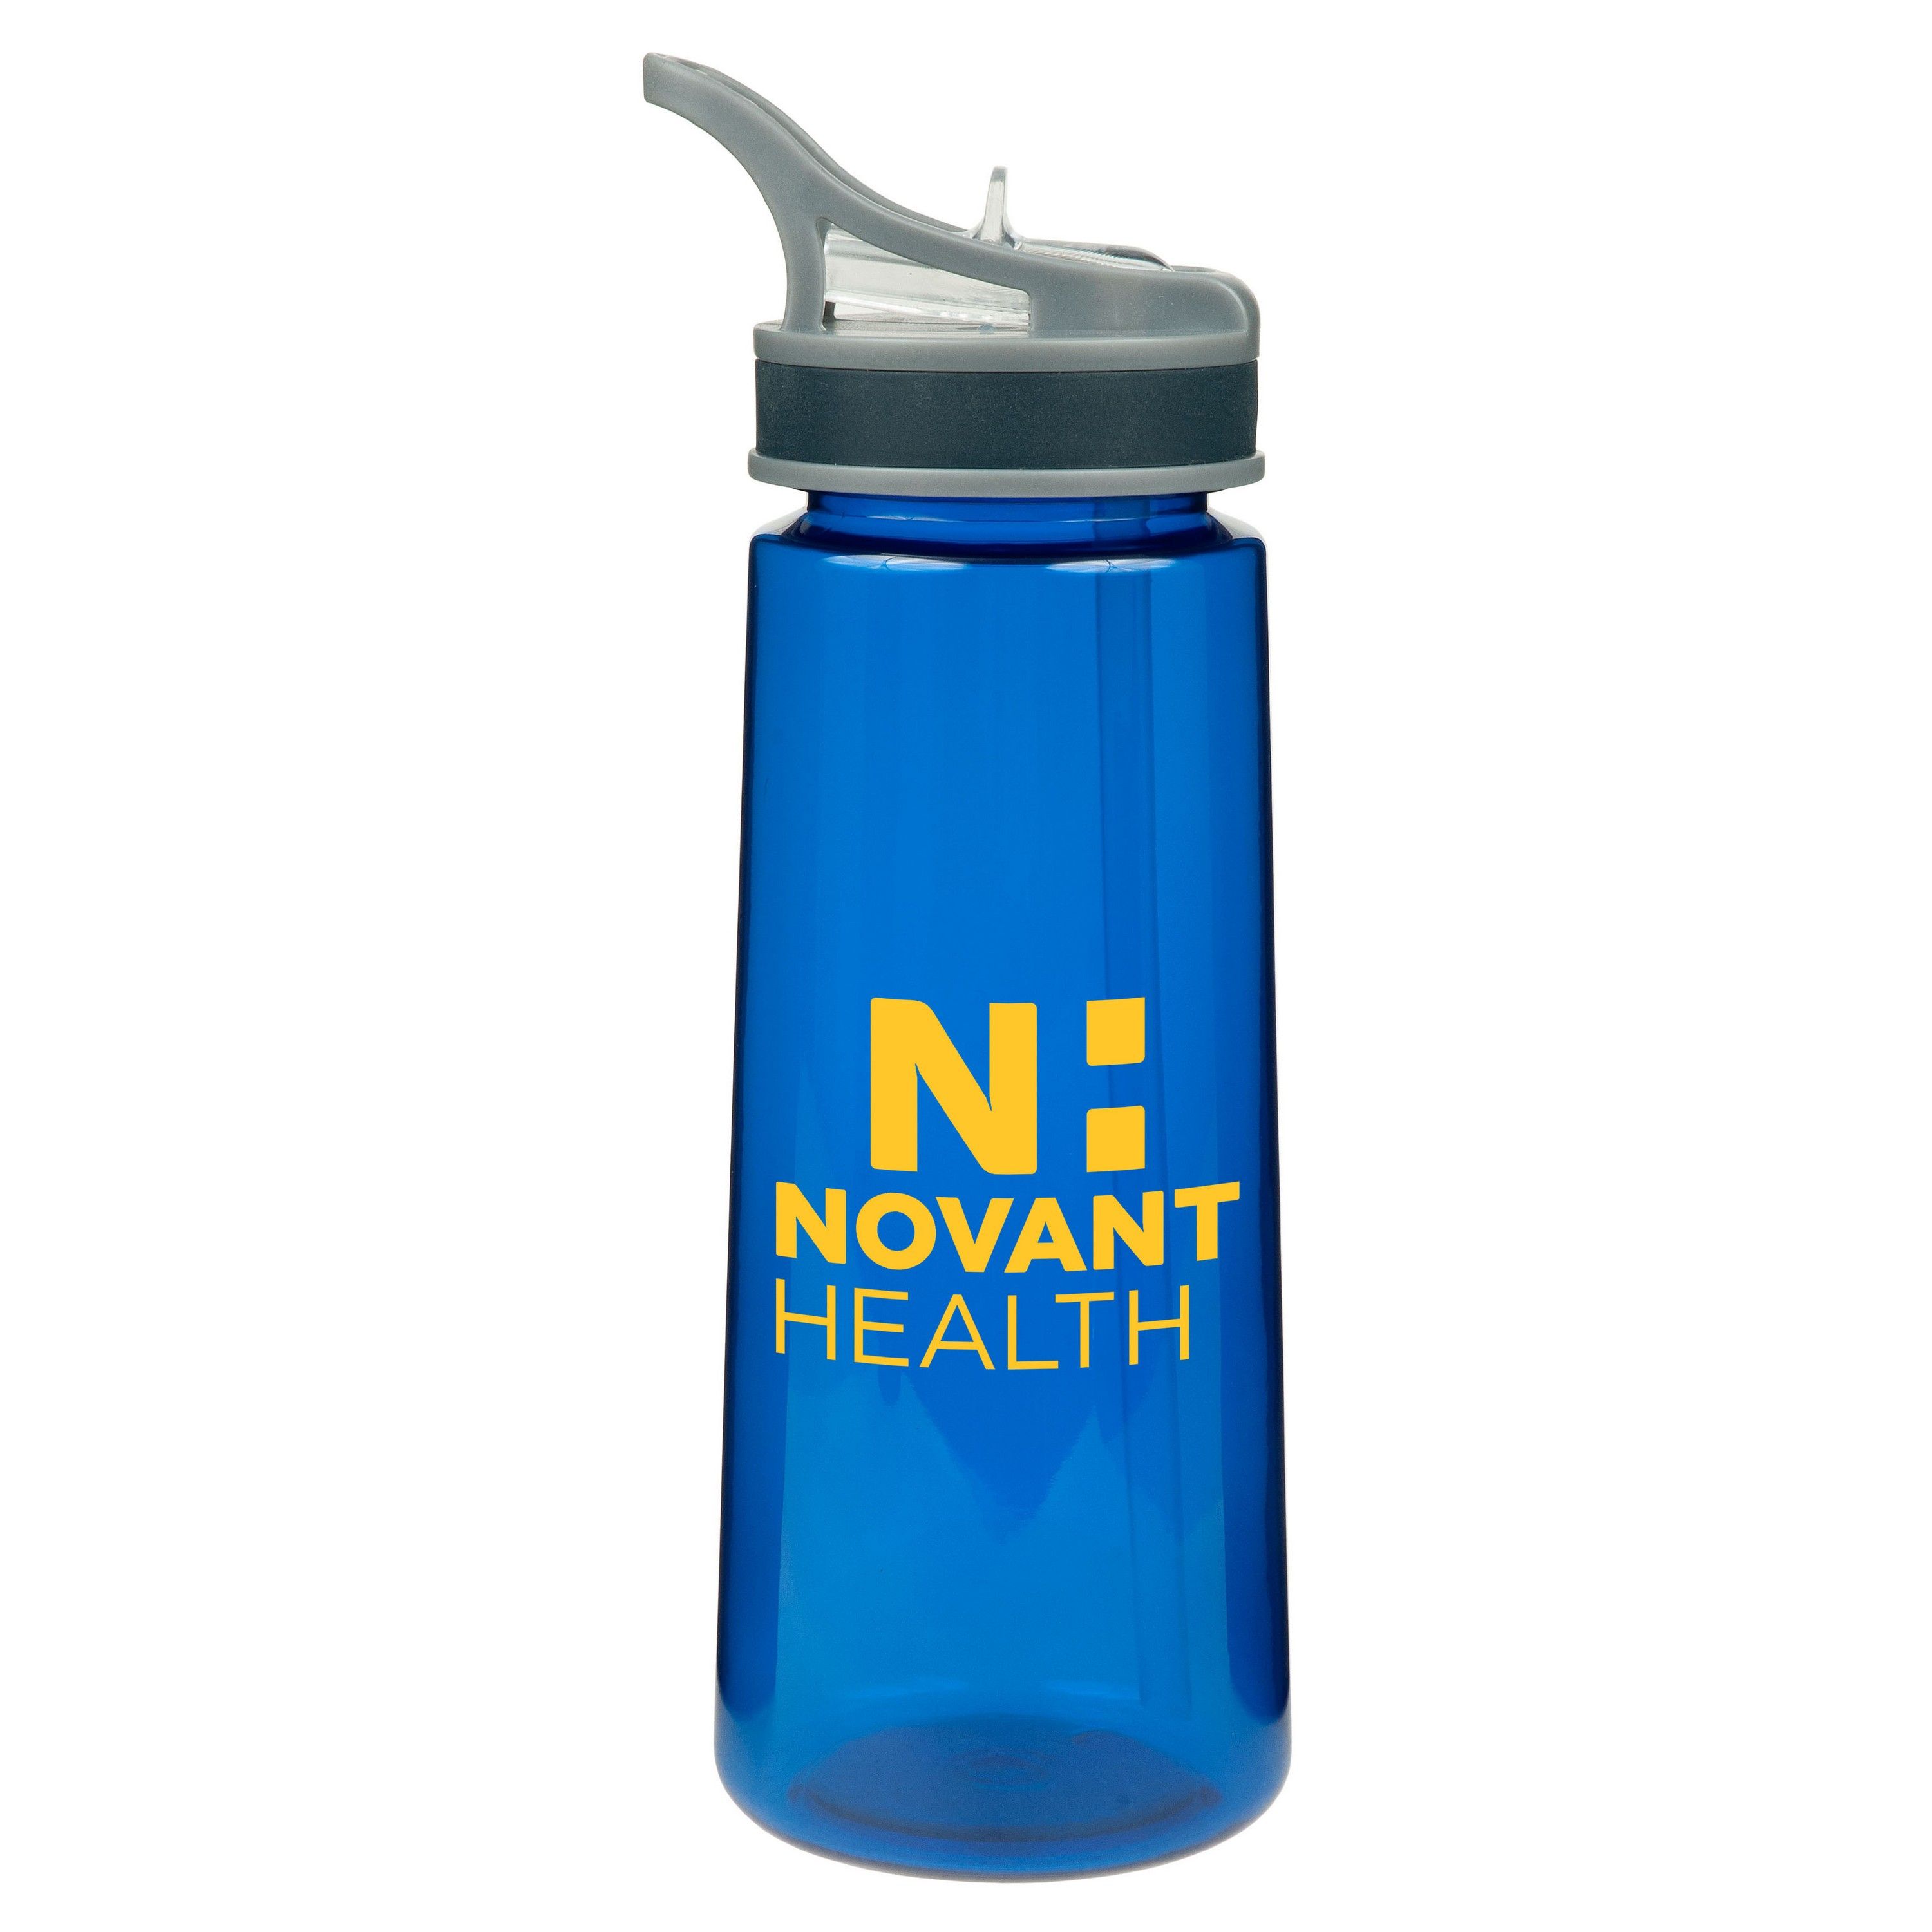 Water bottle with branding